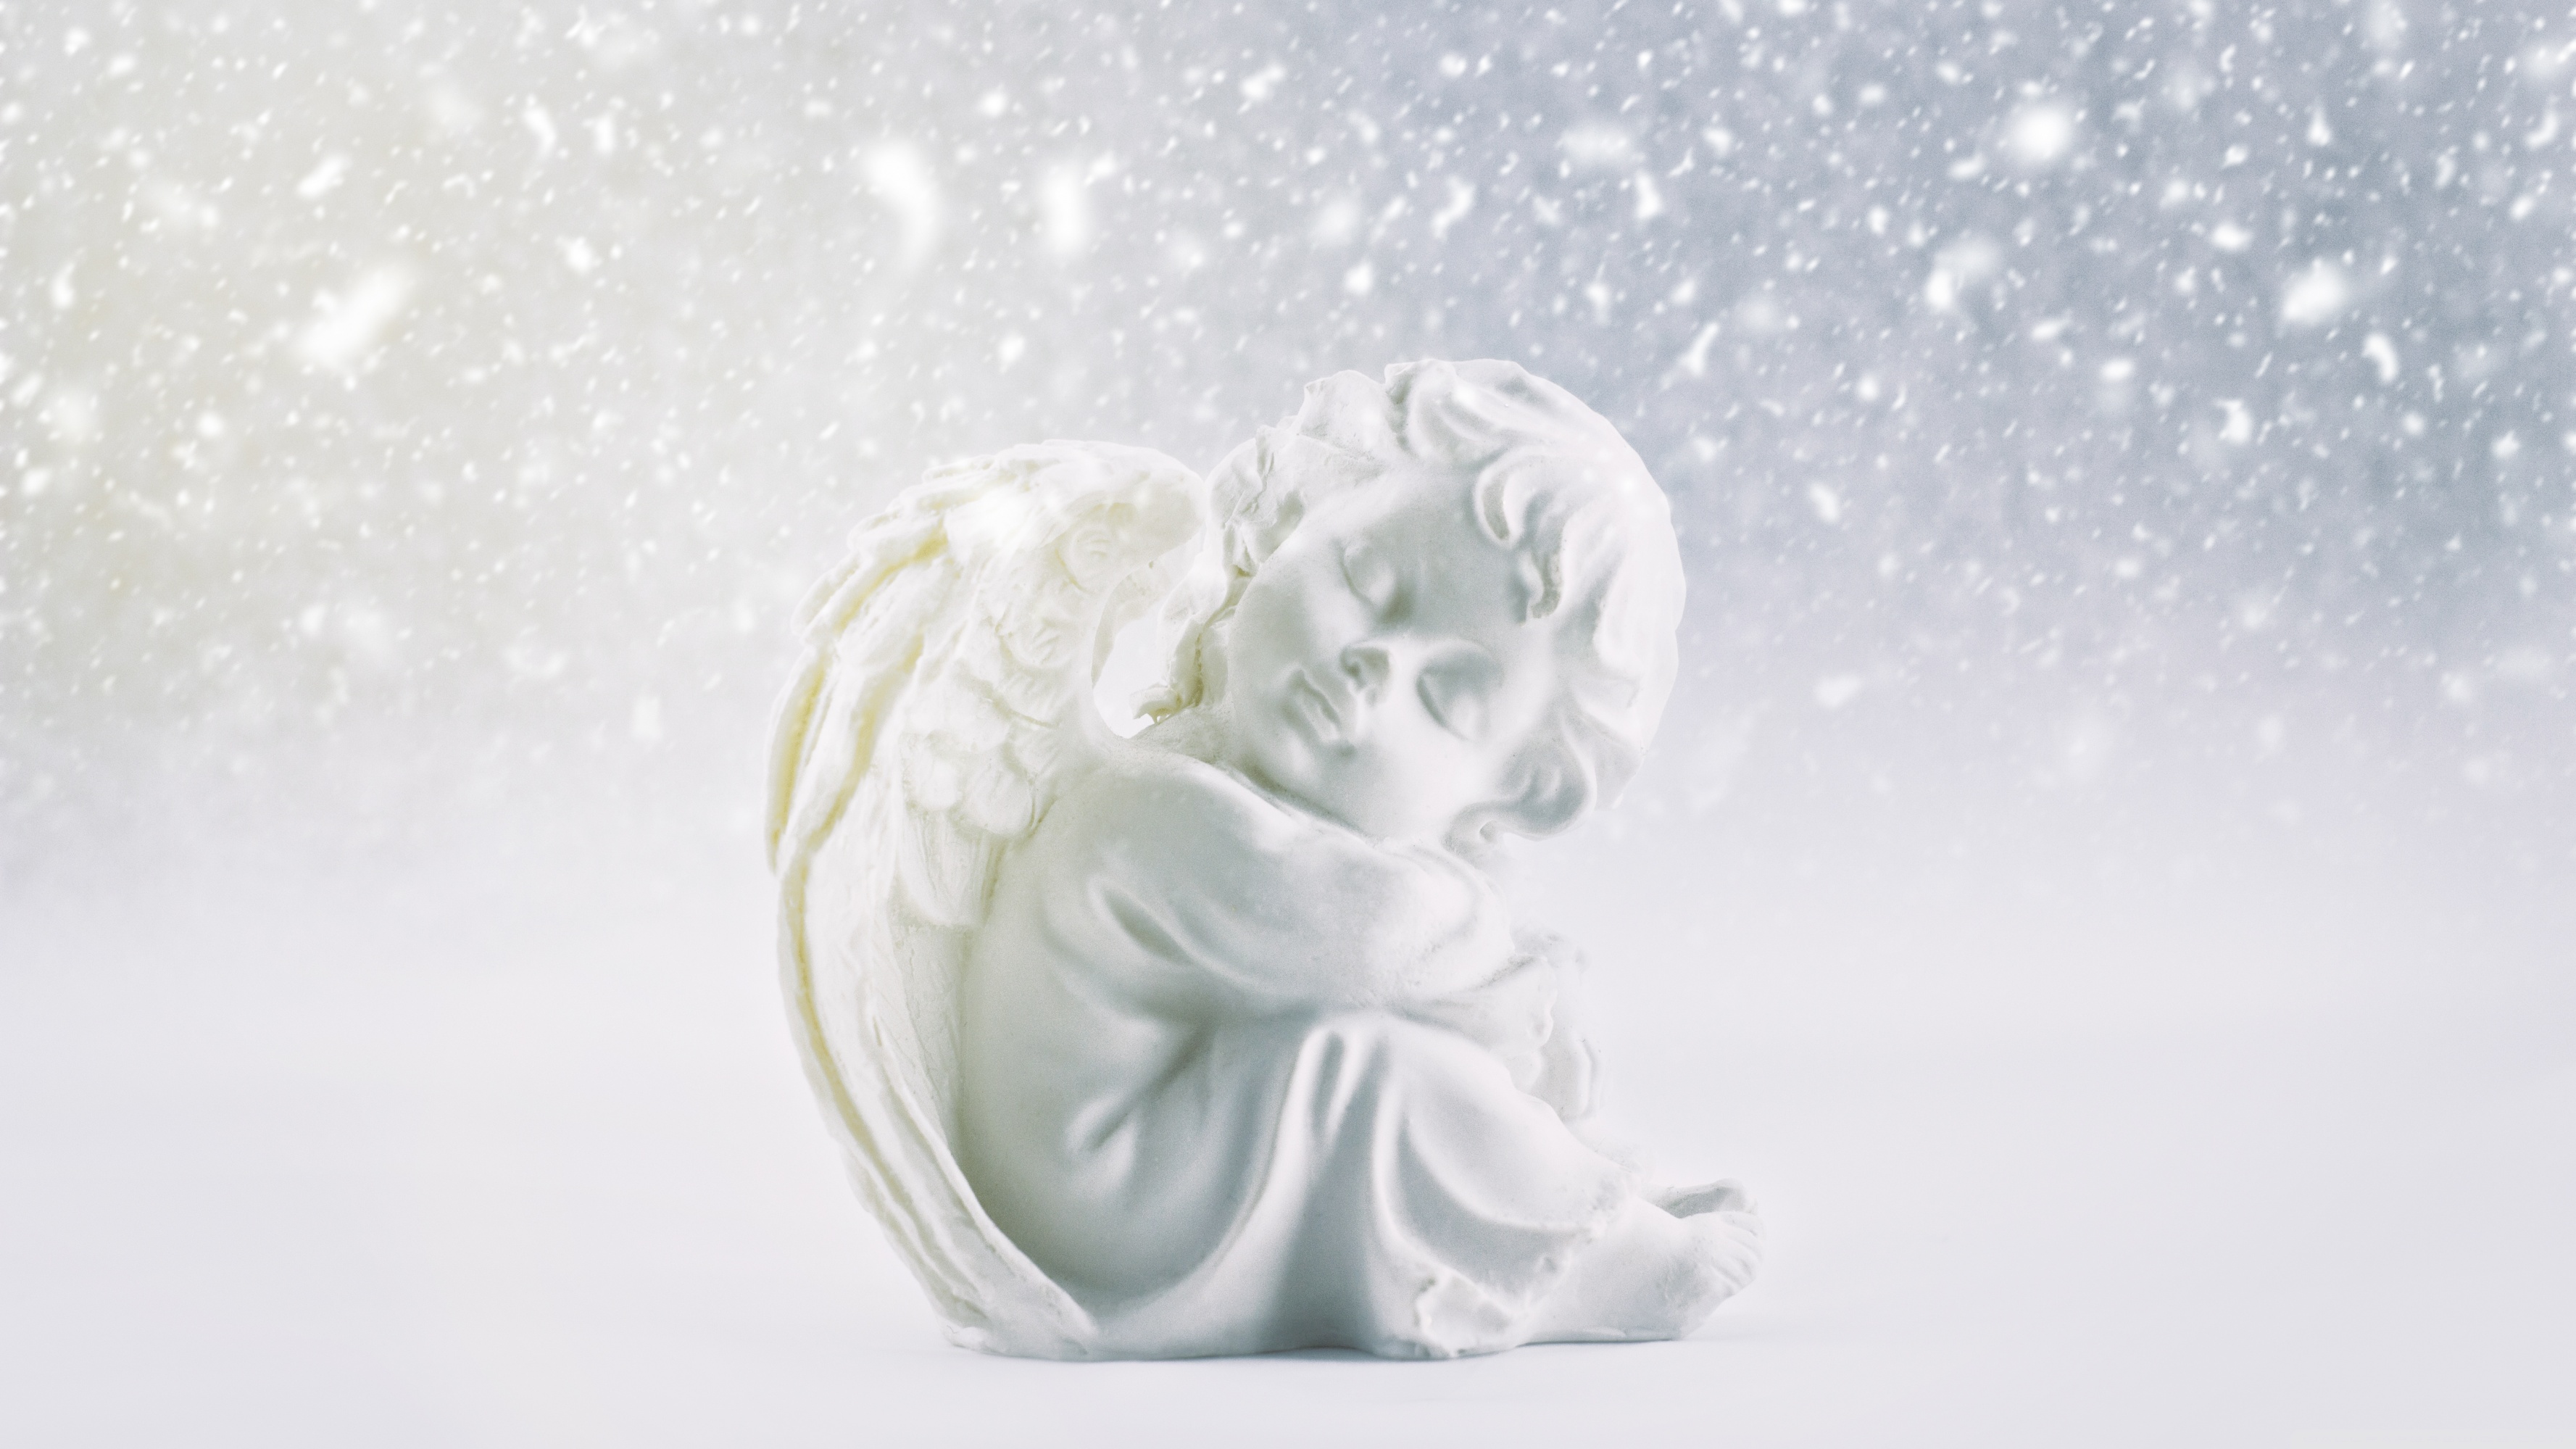 Angel Baby Images Hd - HD Wallpaper 